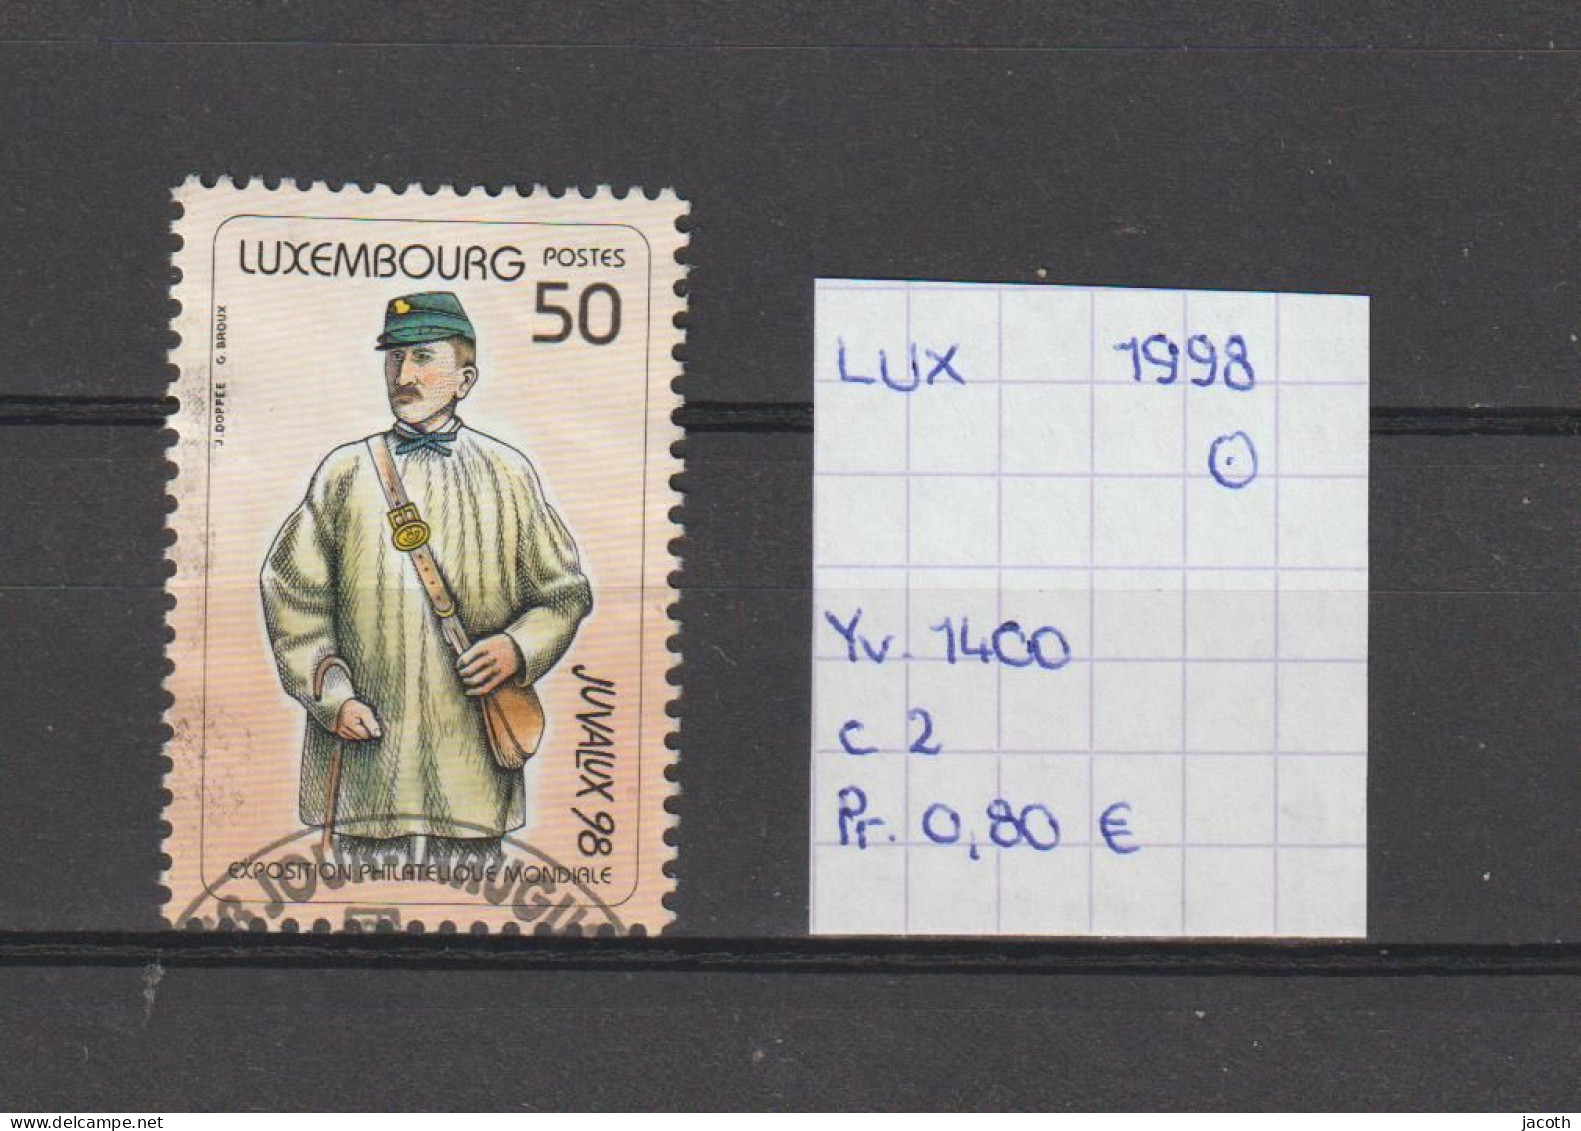 (TJ) Luxembourg 1998 - YT 1400 (gest./obl./used) - Used Stamps